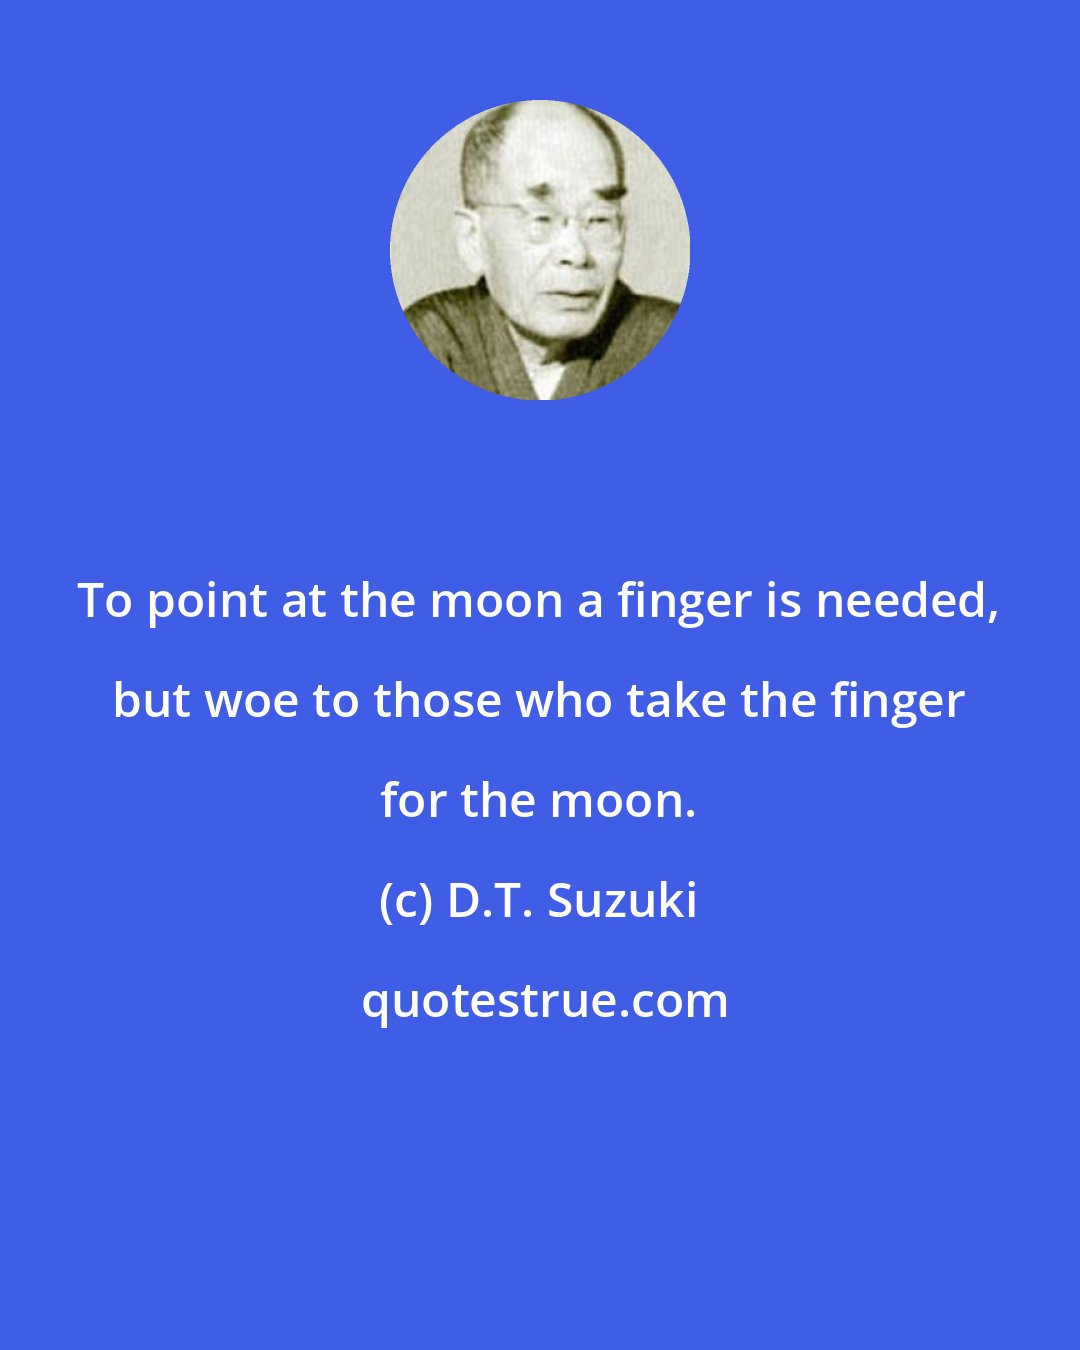 D.T. Suzuki: To point at the moon a finger is needed, but woe to those who take the finger for the moon.